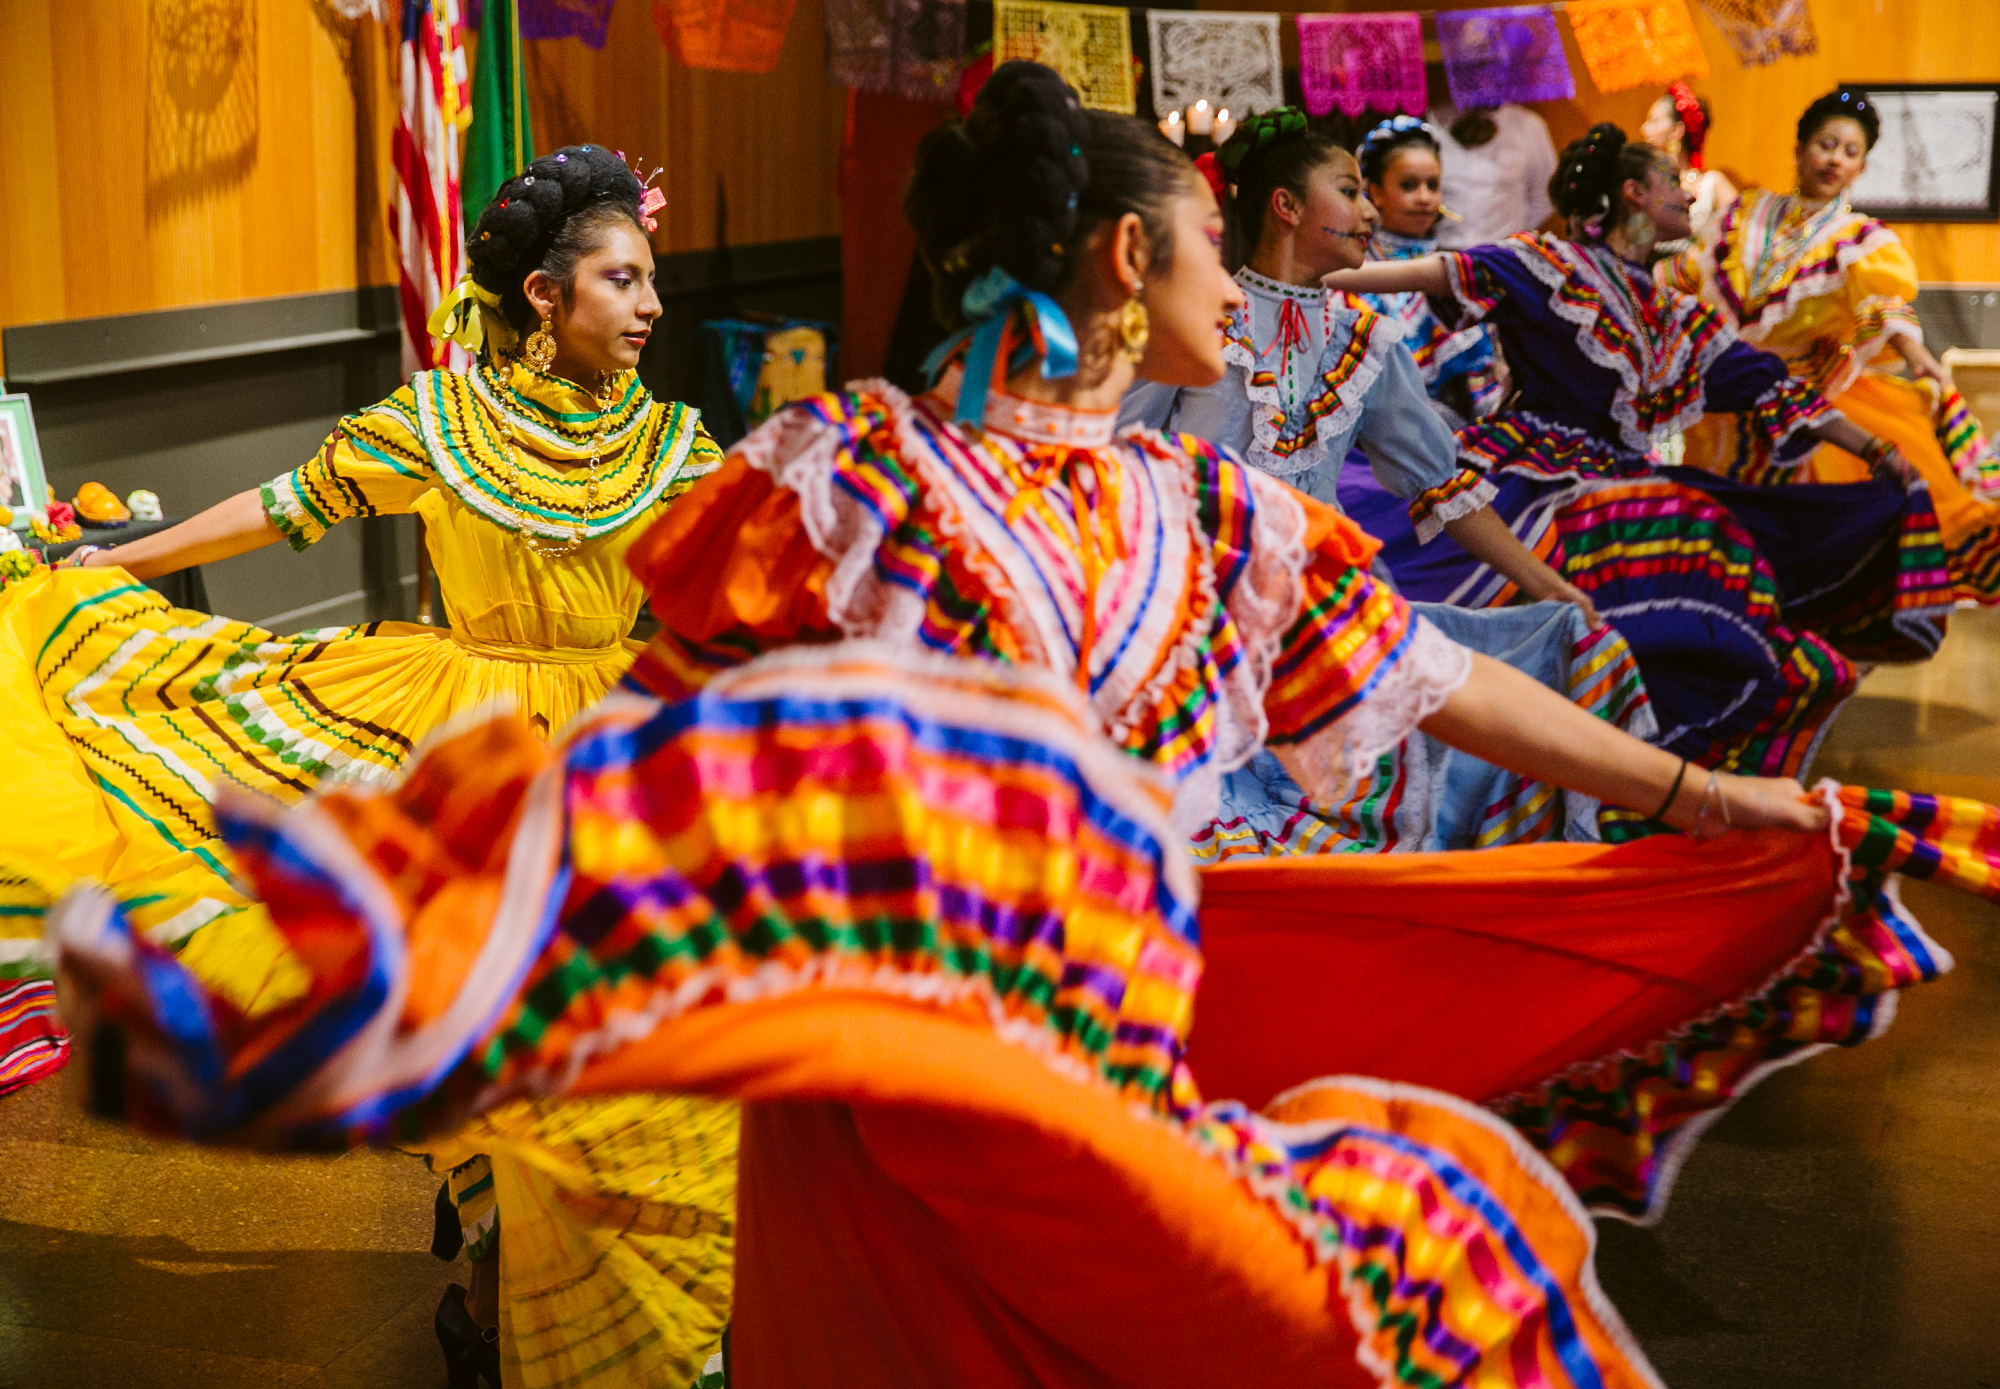 Vancouver Ballet Folklorico performs during a Dia de los Muertos celebration at the Vancouver Community Library in 2019.